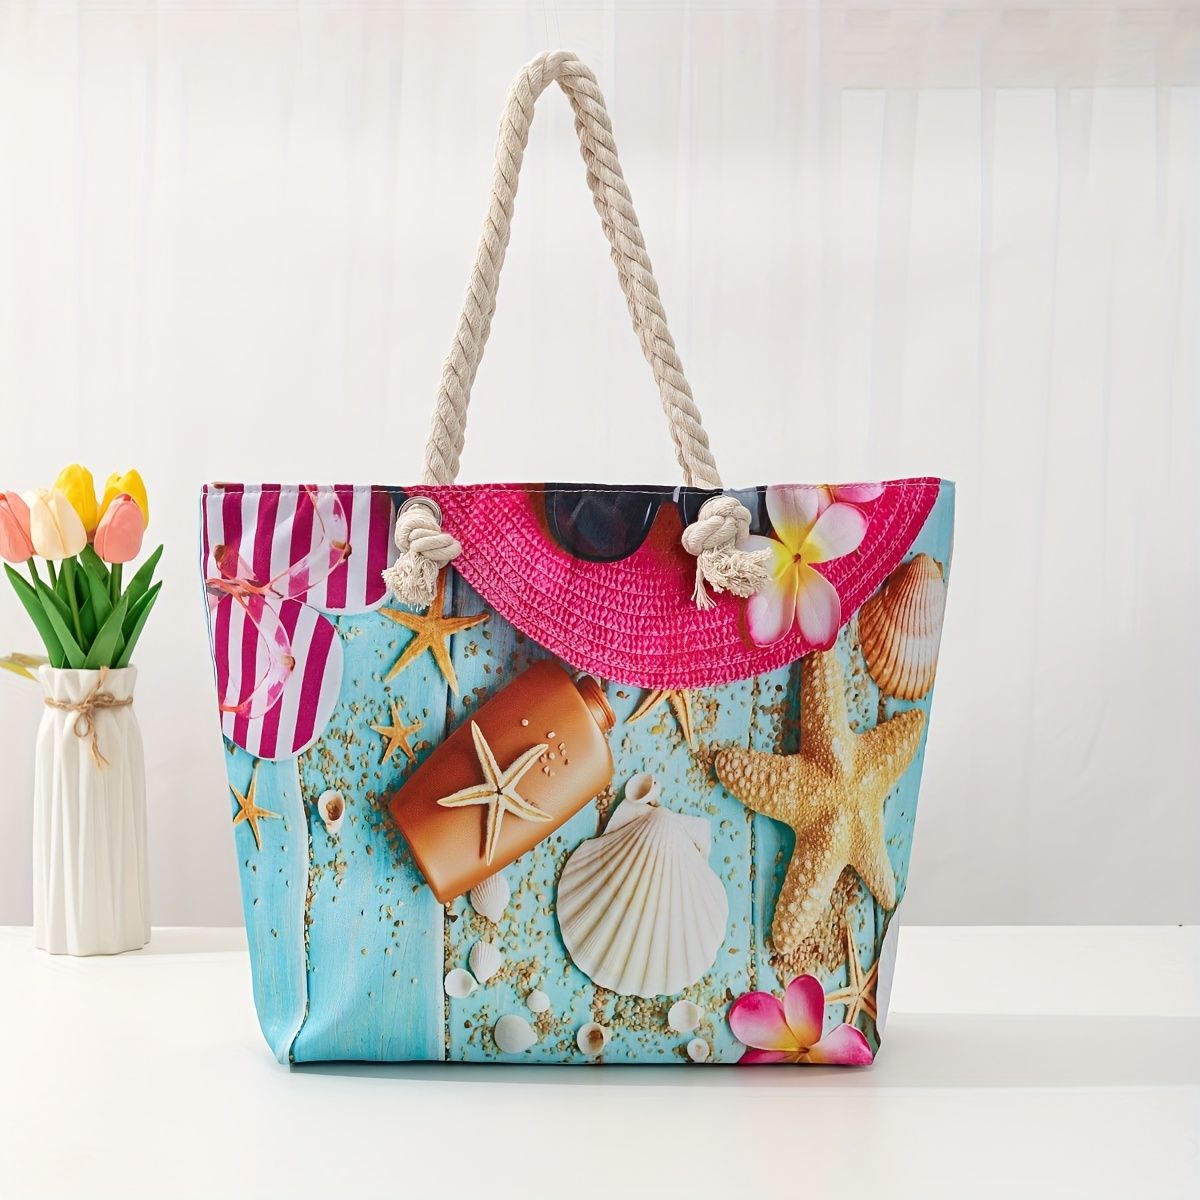 

Seaside Graphic Canvas Tote Bag, Fashionable Double-handle Shoulder Bag For Beach Holiday